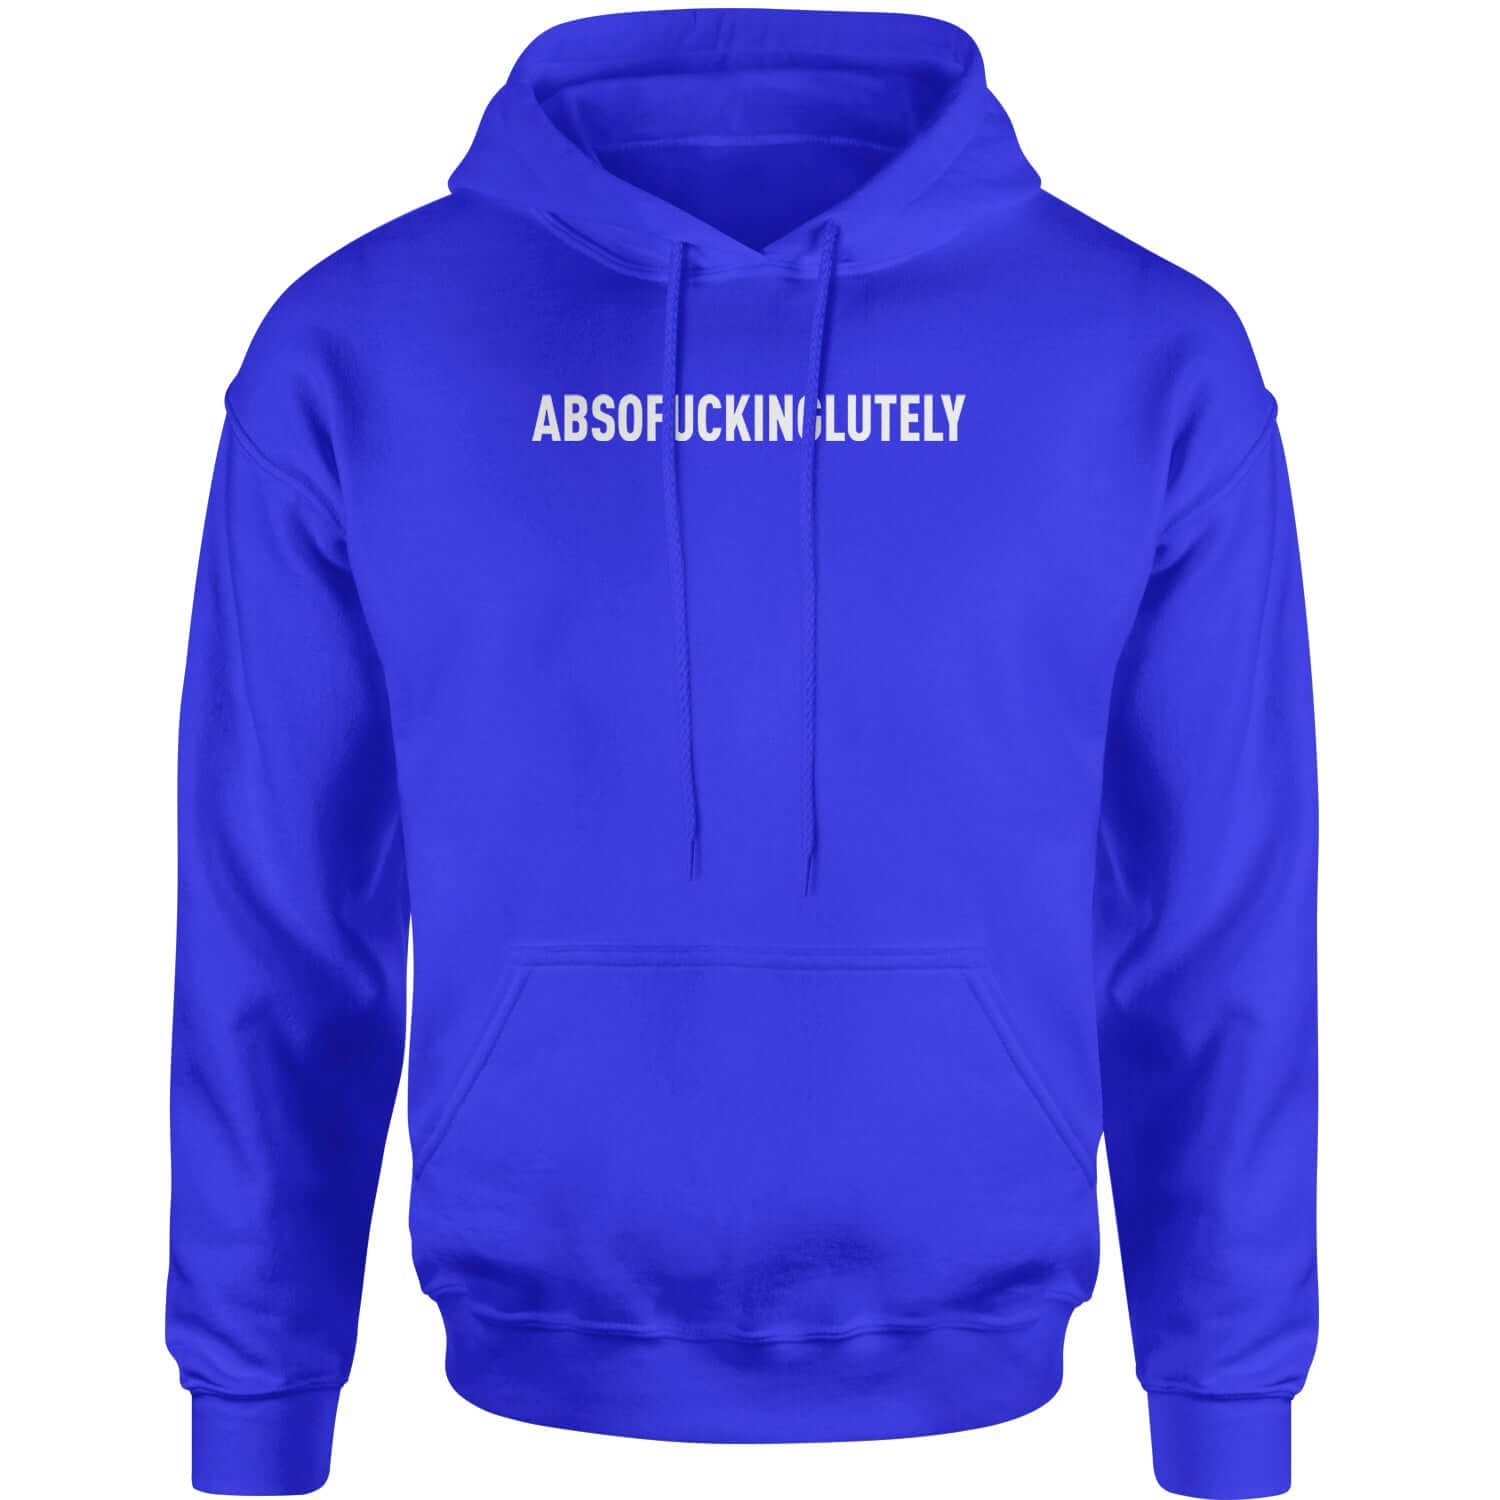 Abso f-cking lutely Adult Hoodie Sweatshirt funny, shirt by Expression Tees